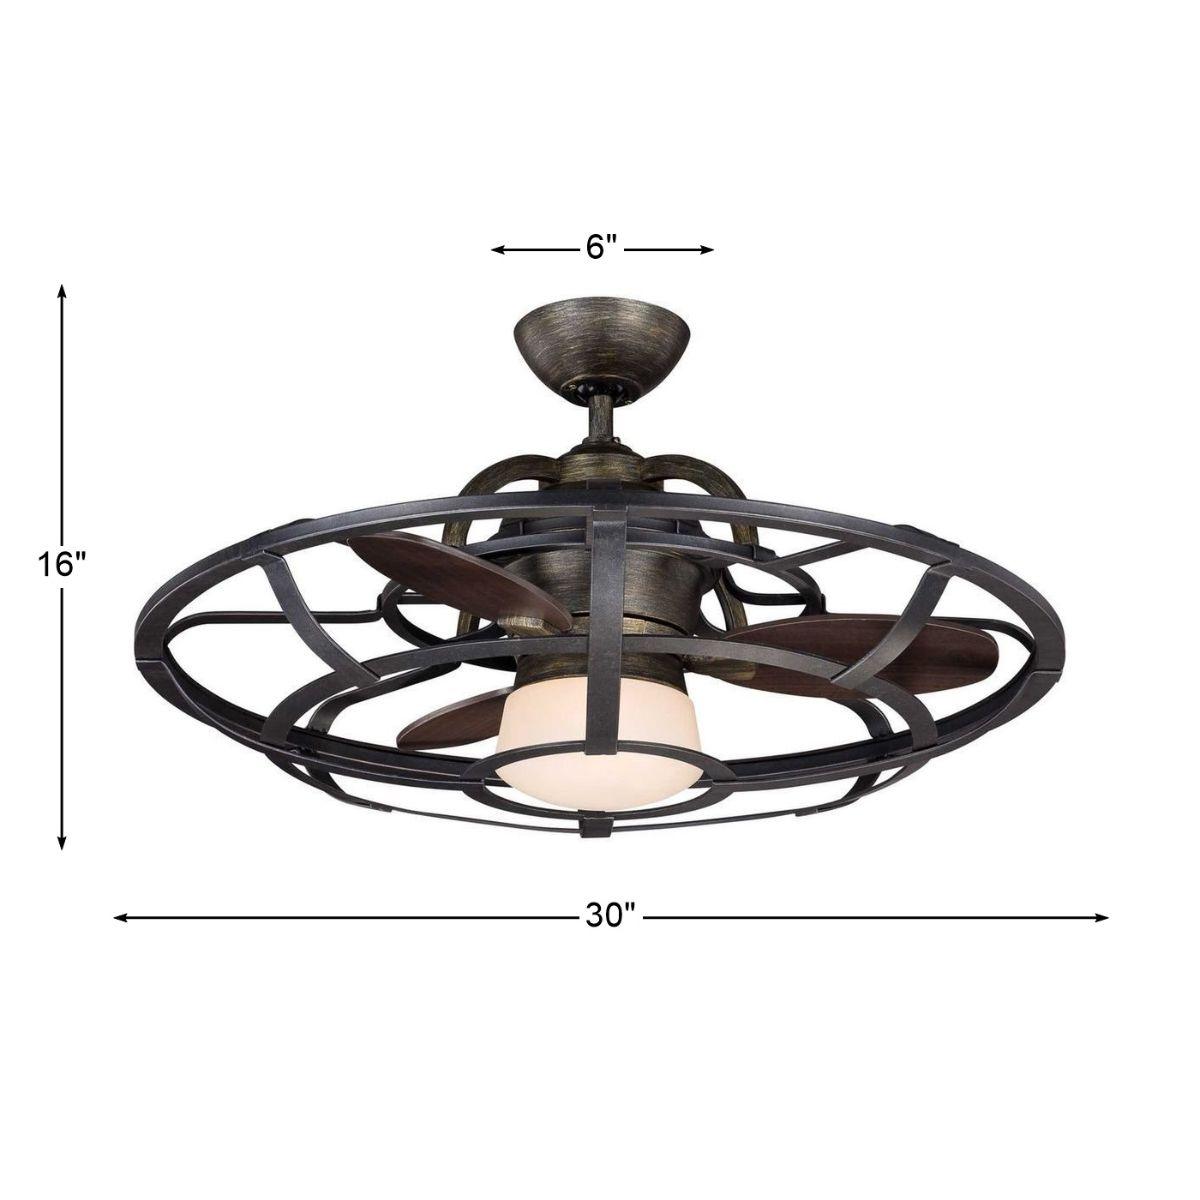 Alsace 30 Inch Outdoor Chandelier Ceiling Fan With Light And Remote, Reclaimed Wood Finish